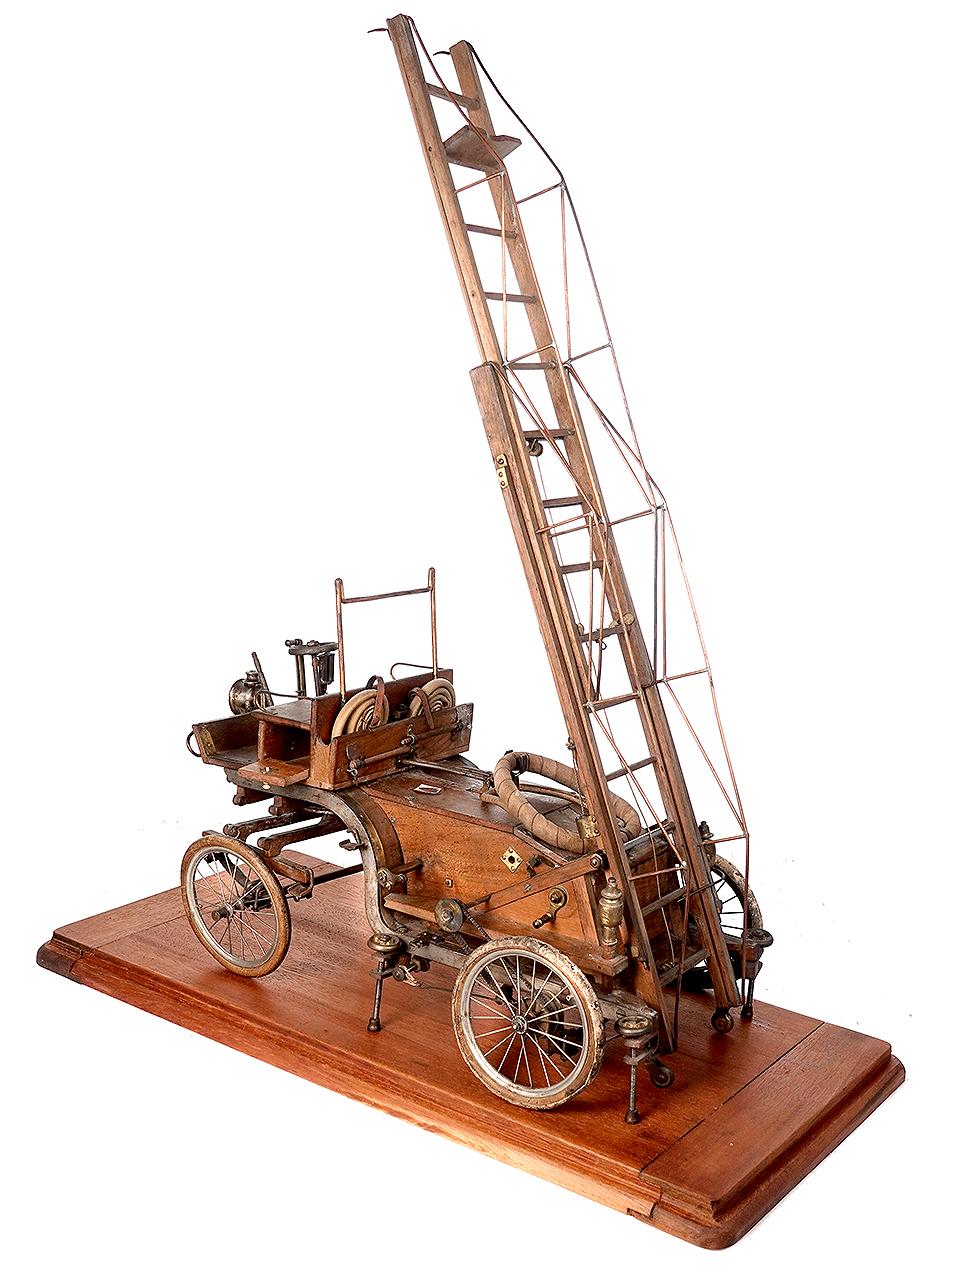 I have very little background on this item. I call it late 1800 but could be as late as 1910 because it may be a model of a very early self propelled ladder truck. I spent some time looking it over. This is really early and considering how fragile